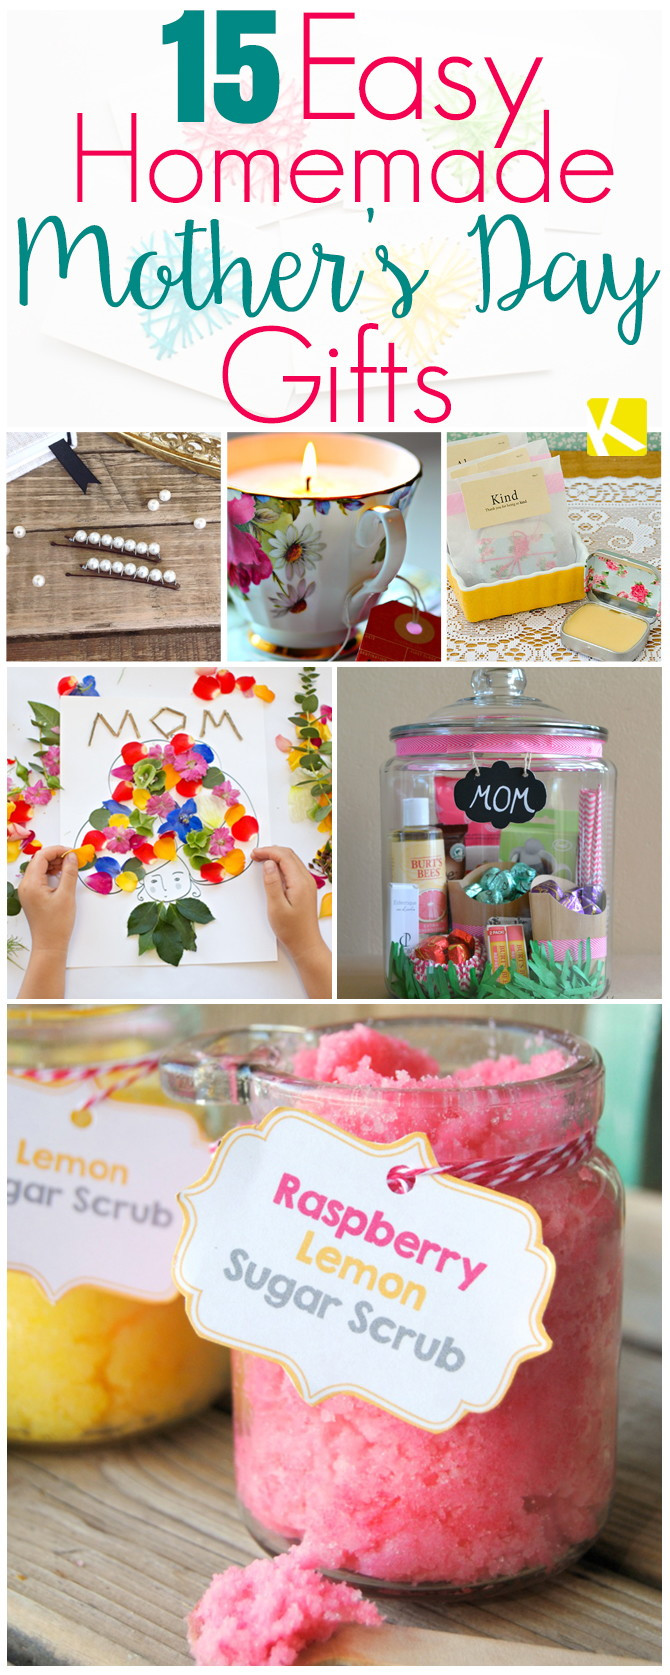 Easy DIY Mother'S Day Gift Ideas
 15 Mother’s Day Gifts That Are Ridiculously Easy to Make